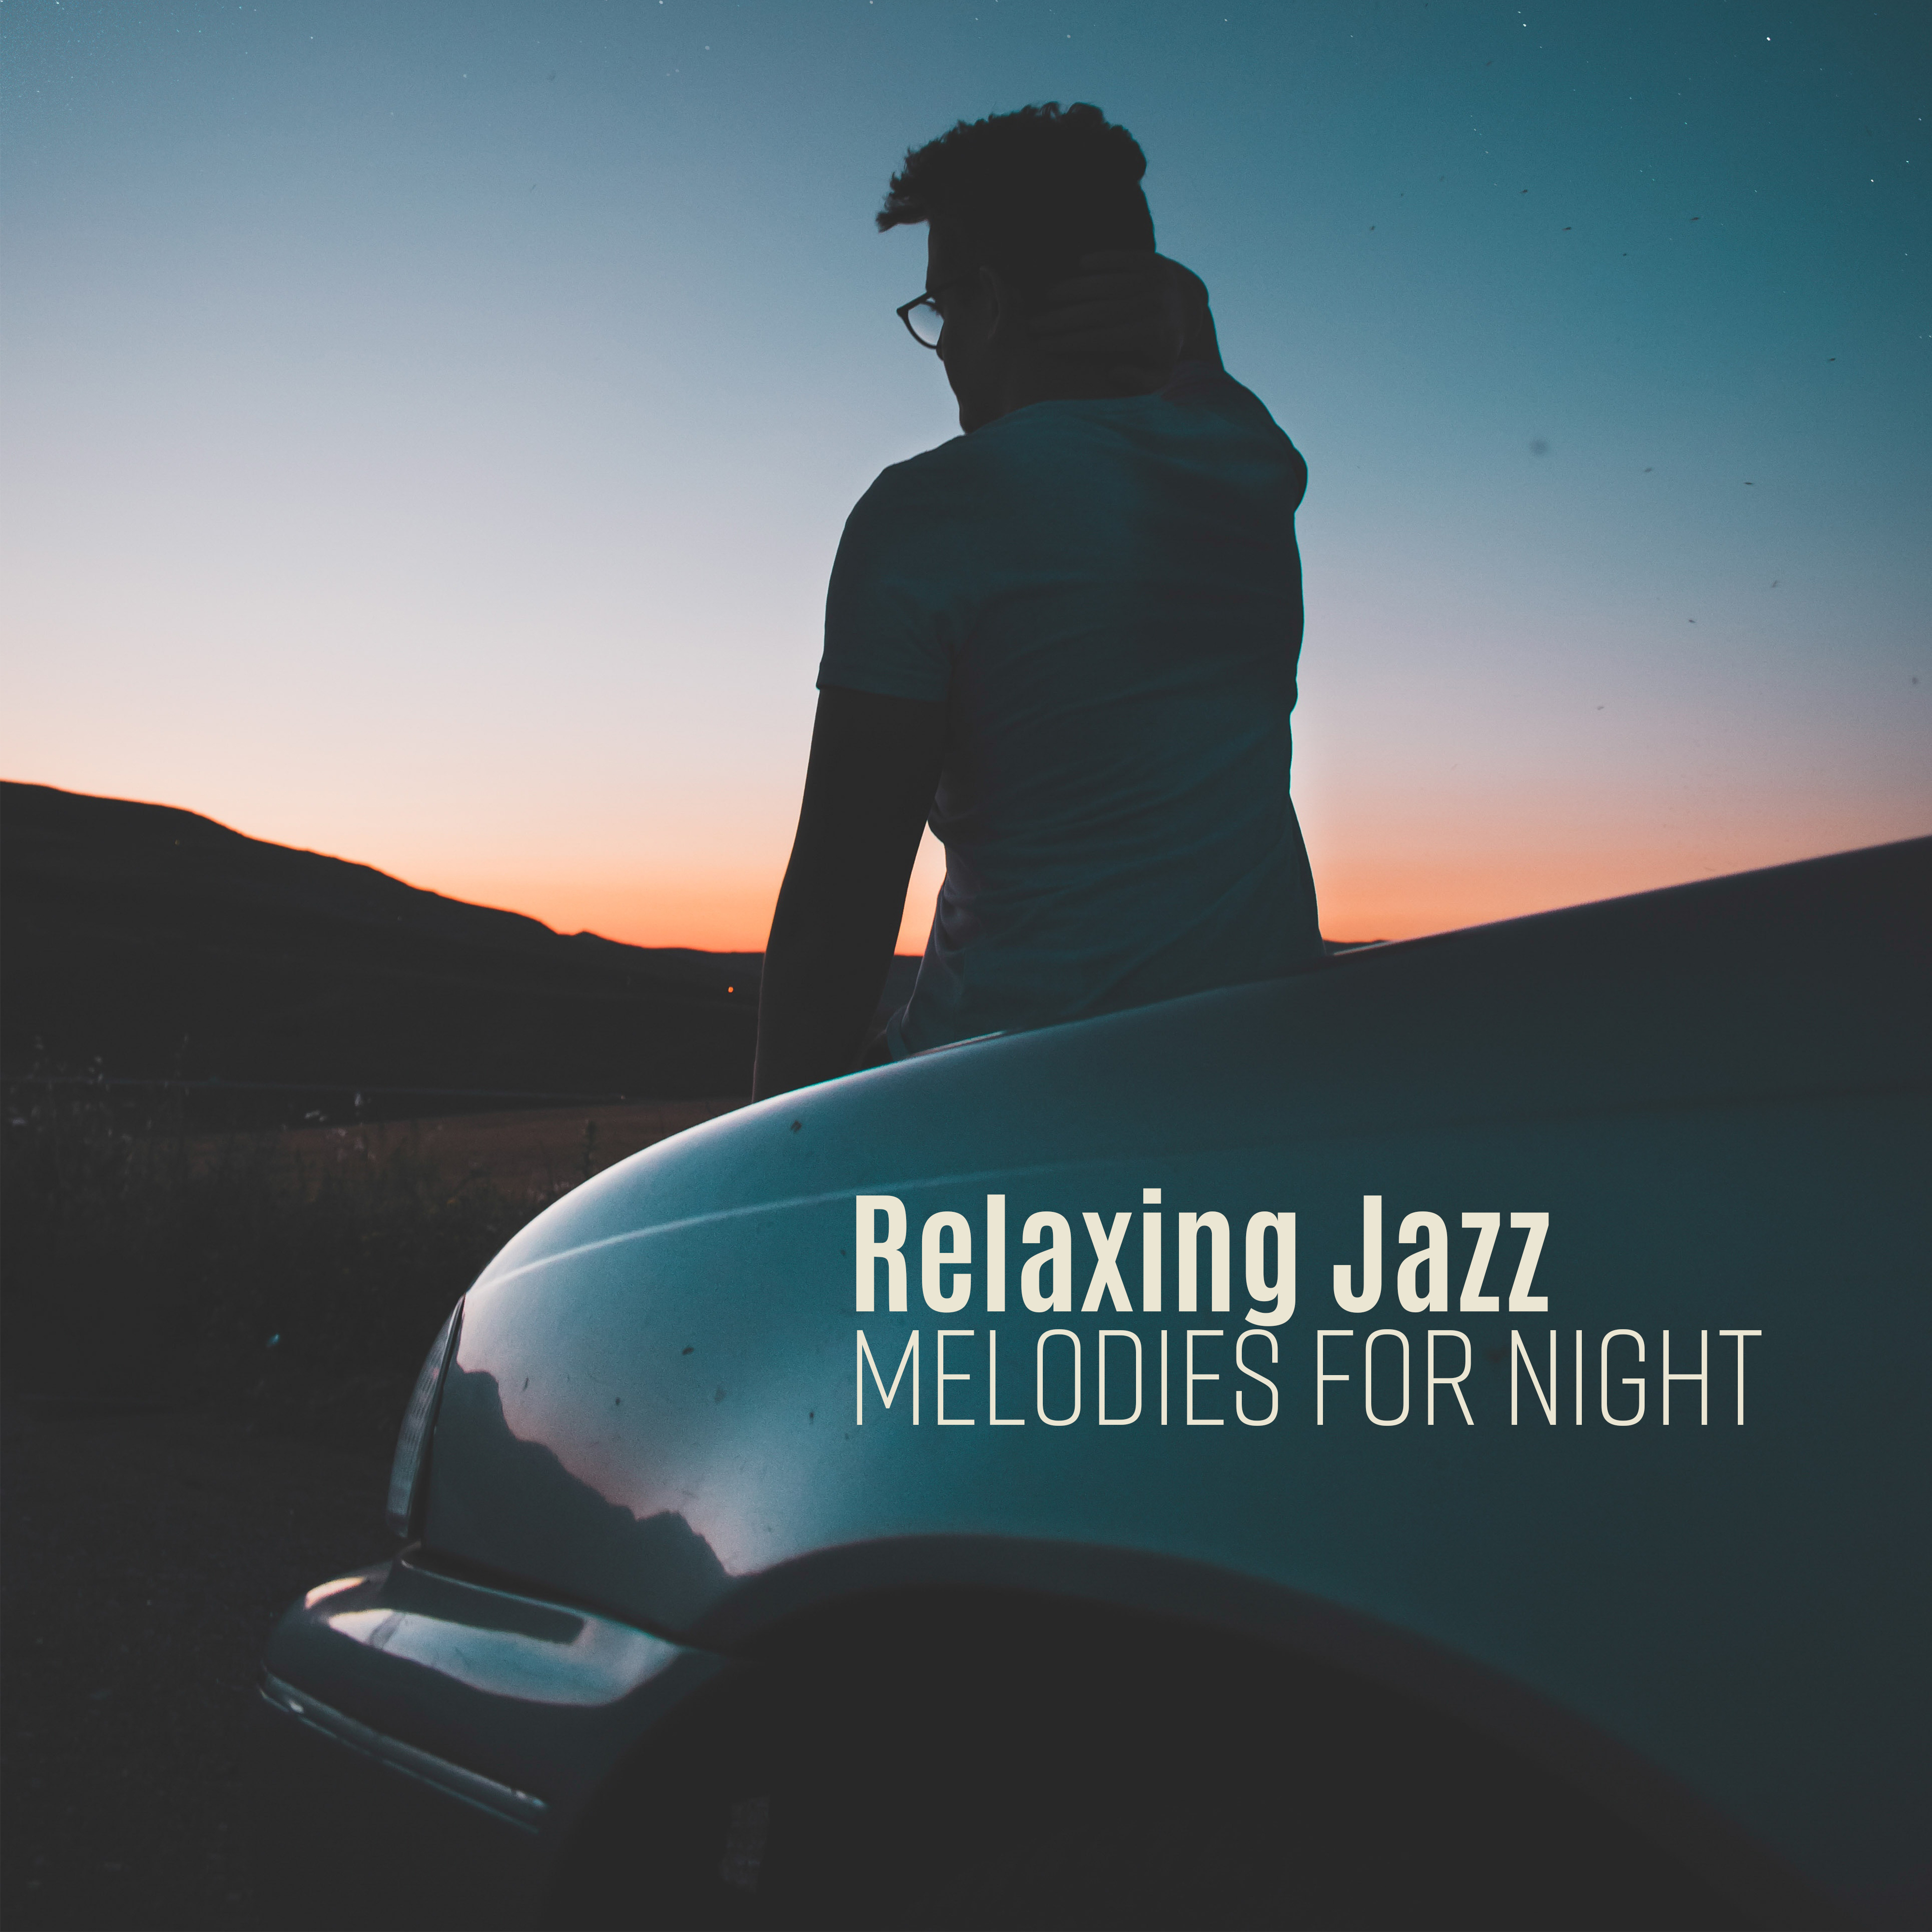 Relaxing Jazz Melodies for Night